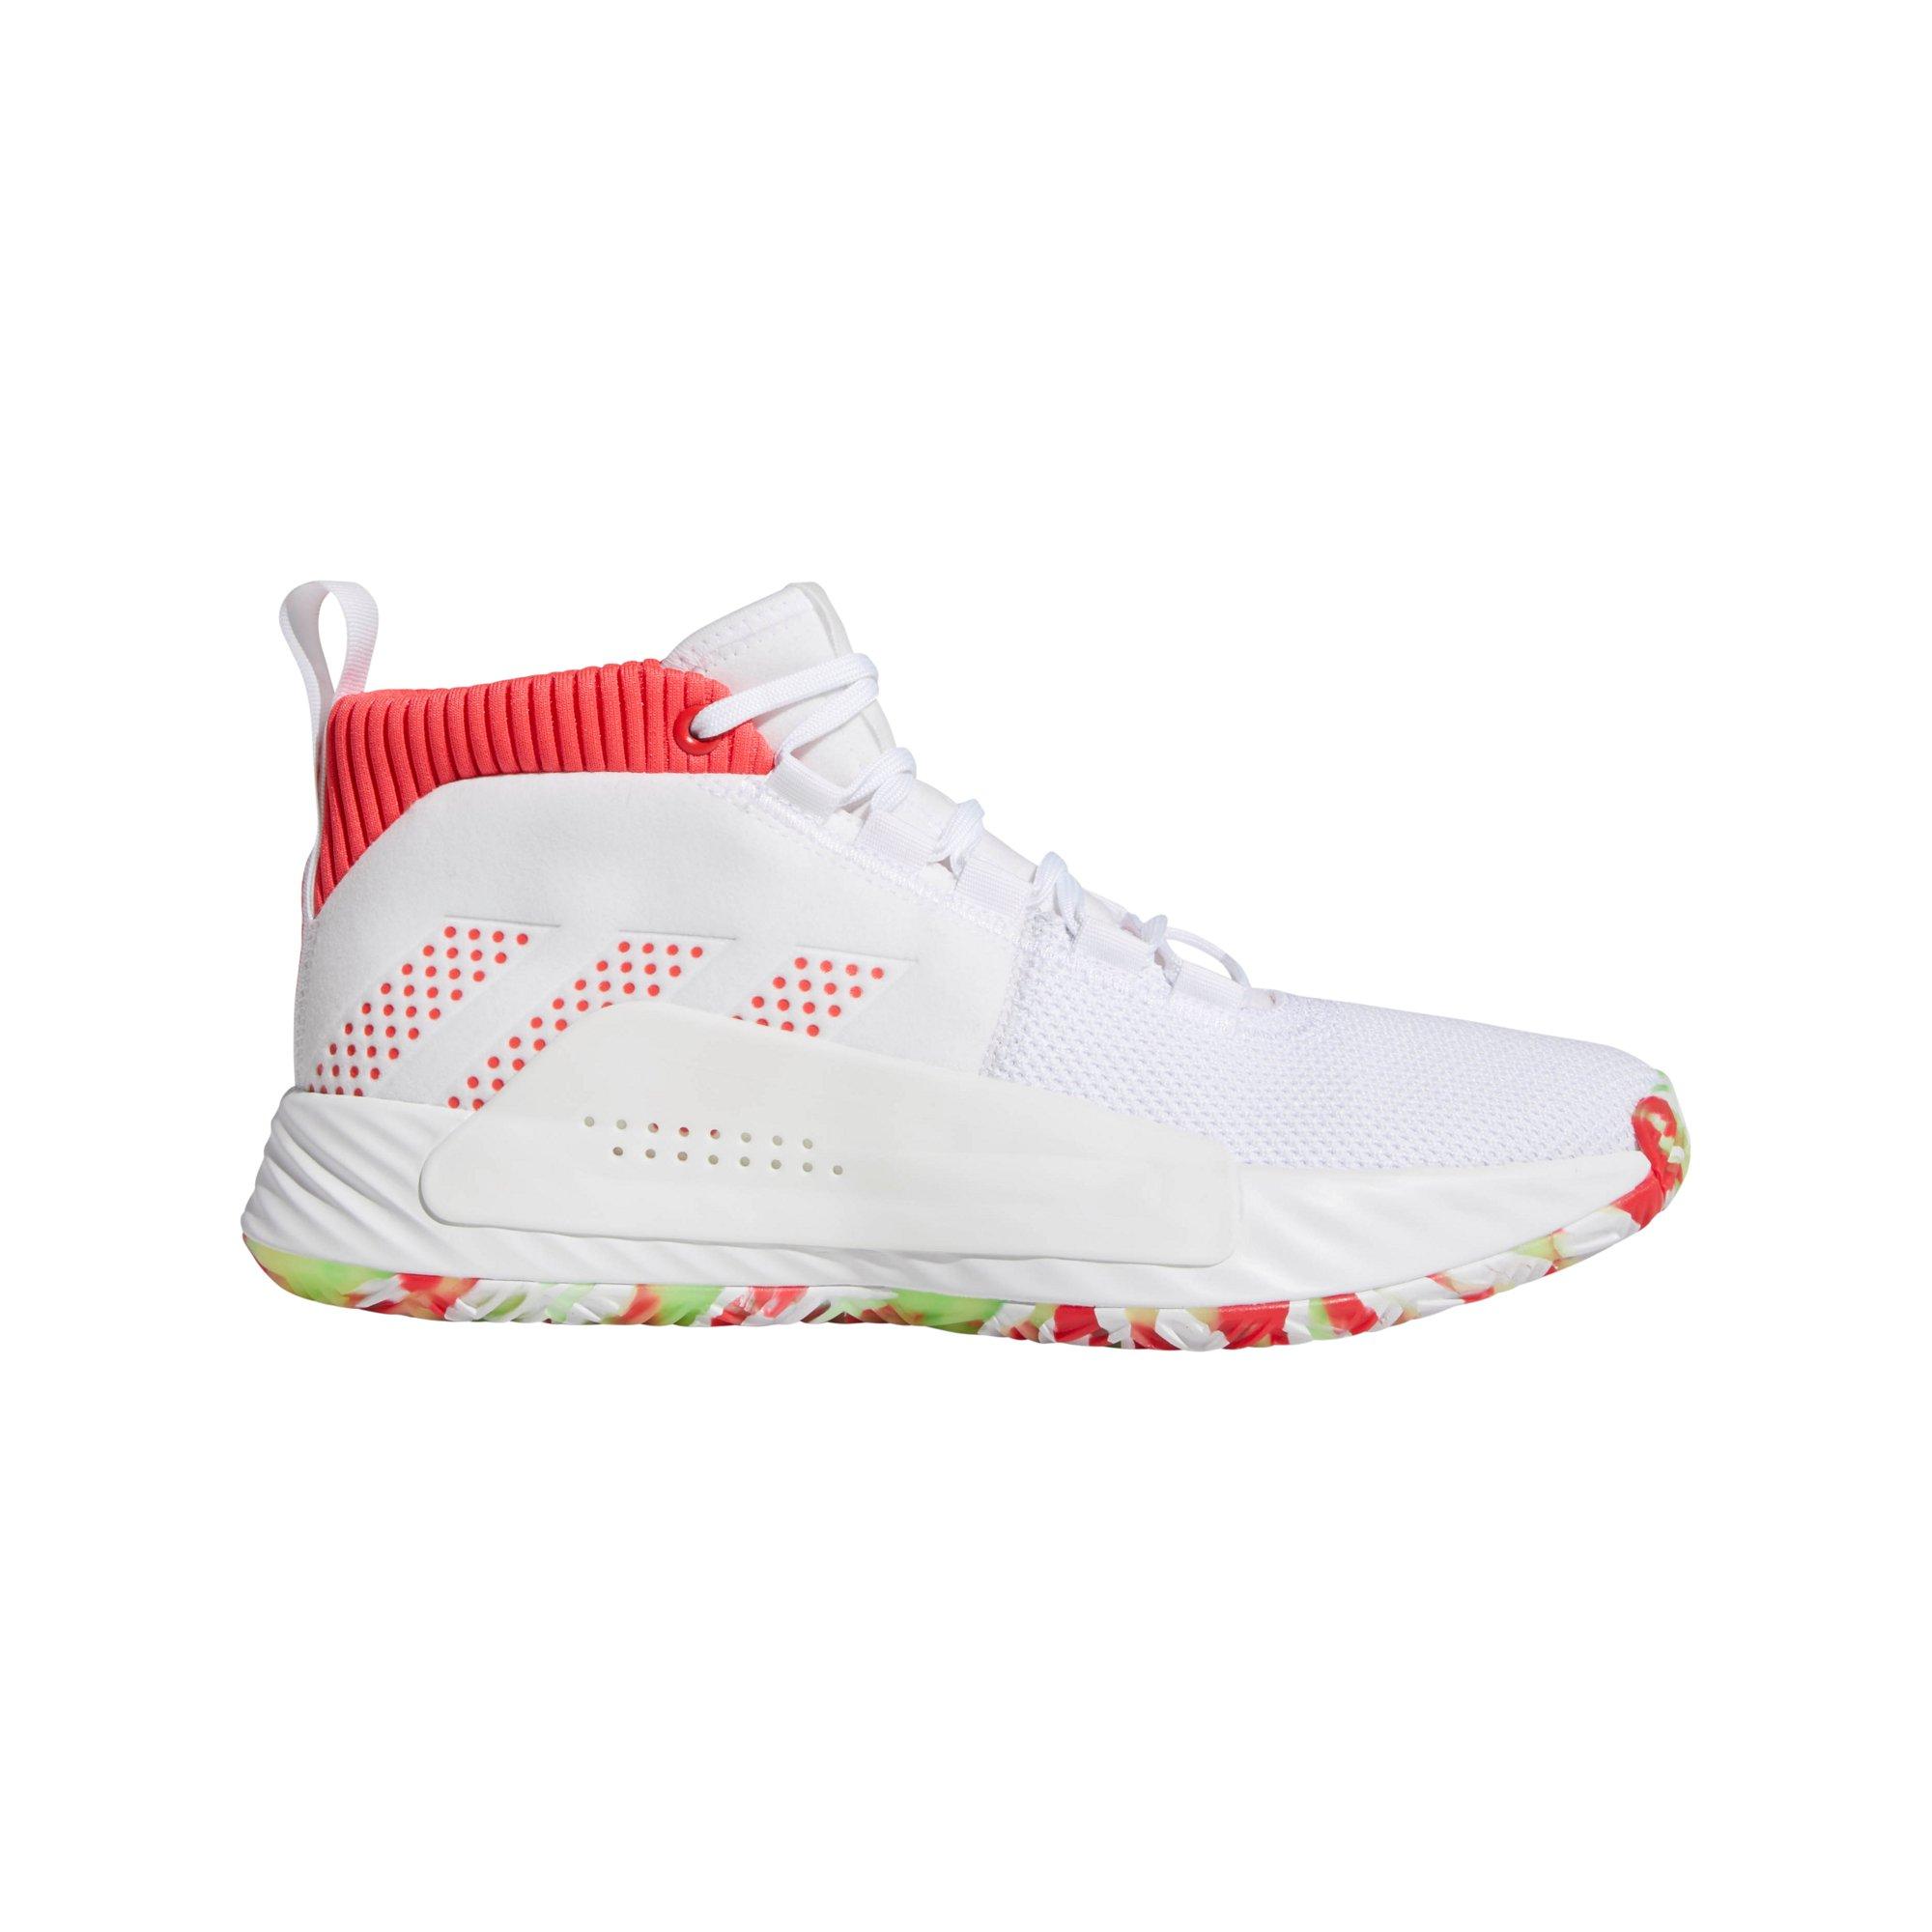 red and white adidas basketball shoes